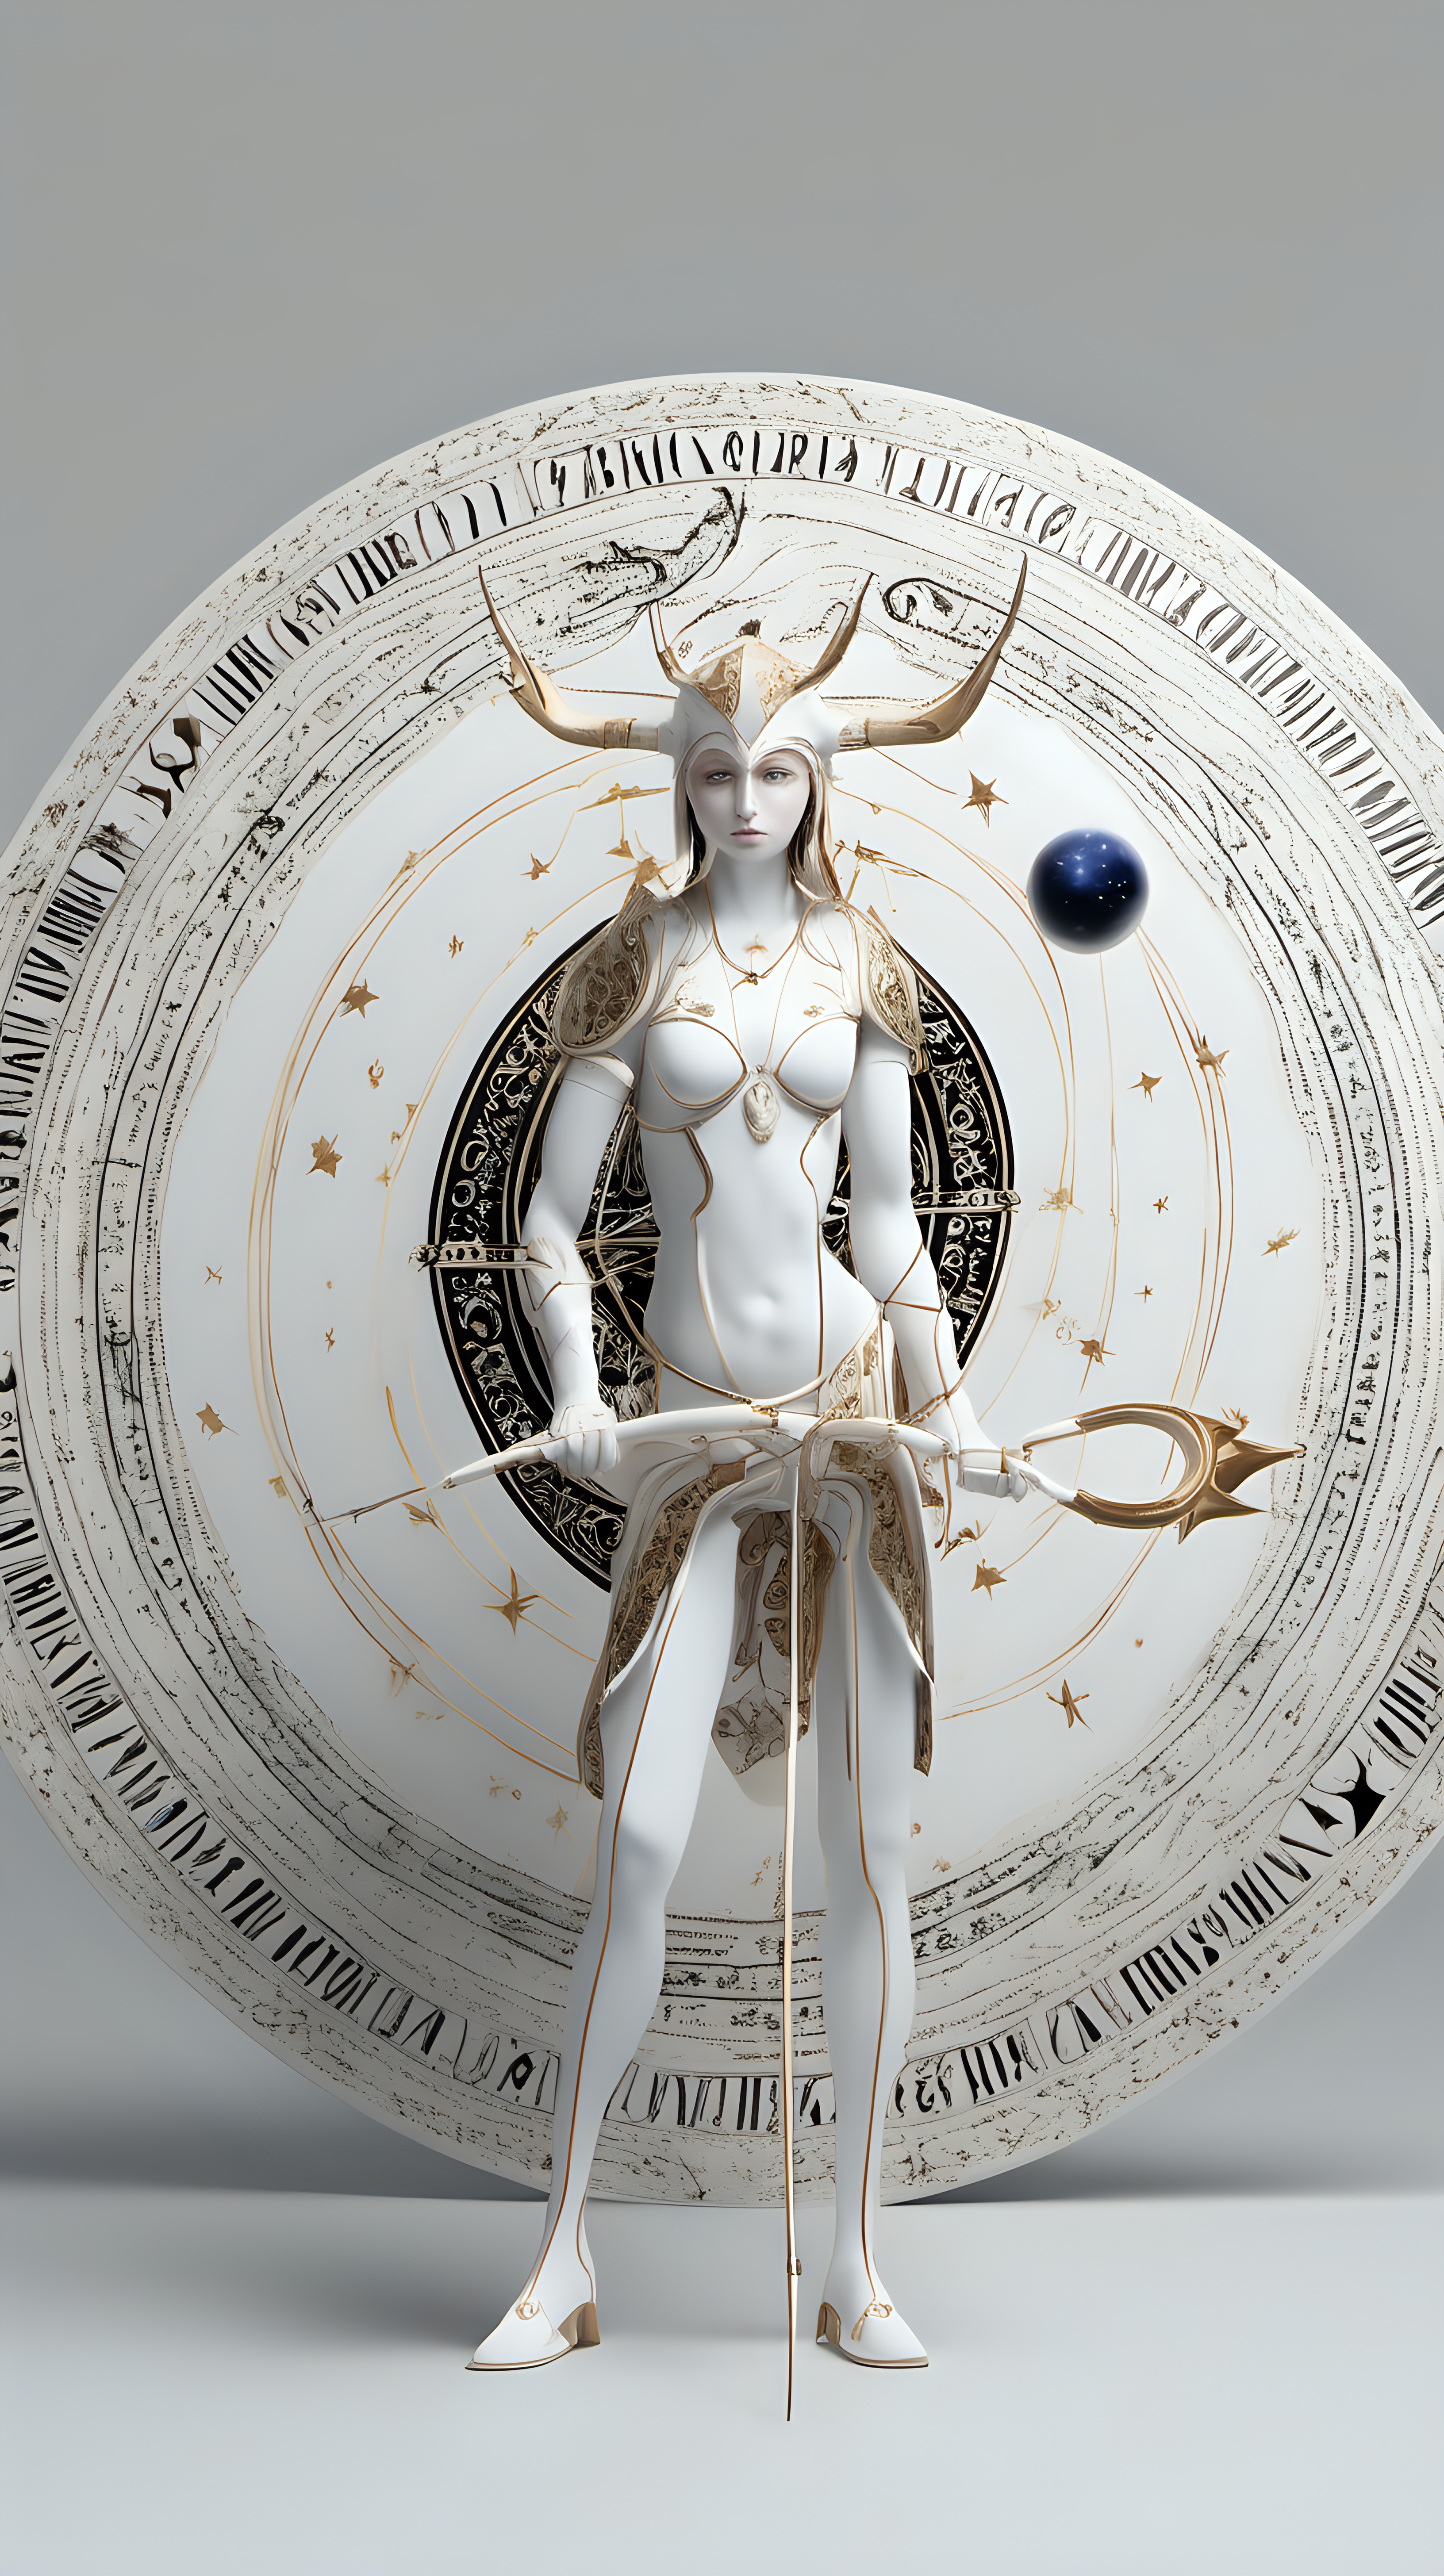 Astrological circle, sagittarius archer 3d porcelain render in the middle of the circle, porcelain eyes